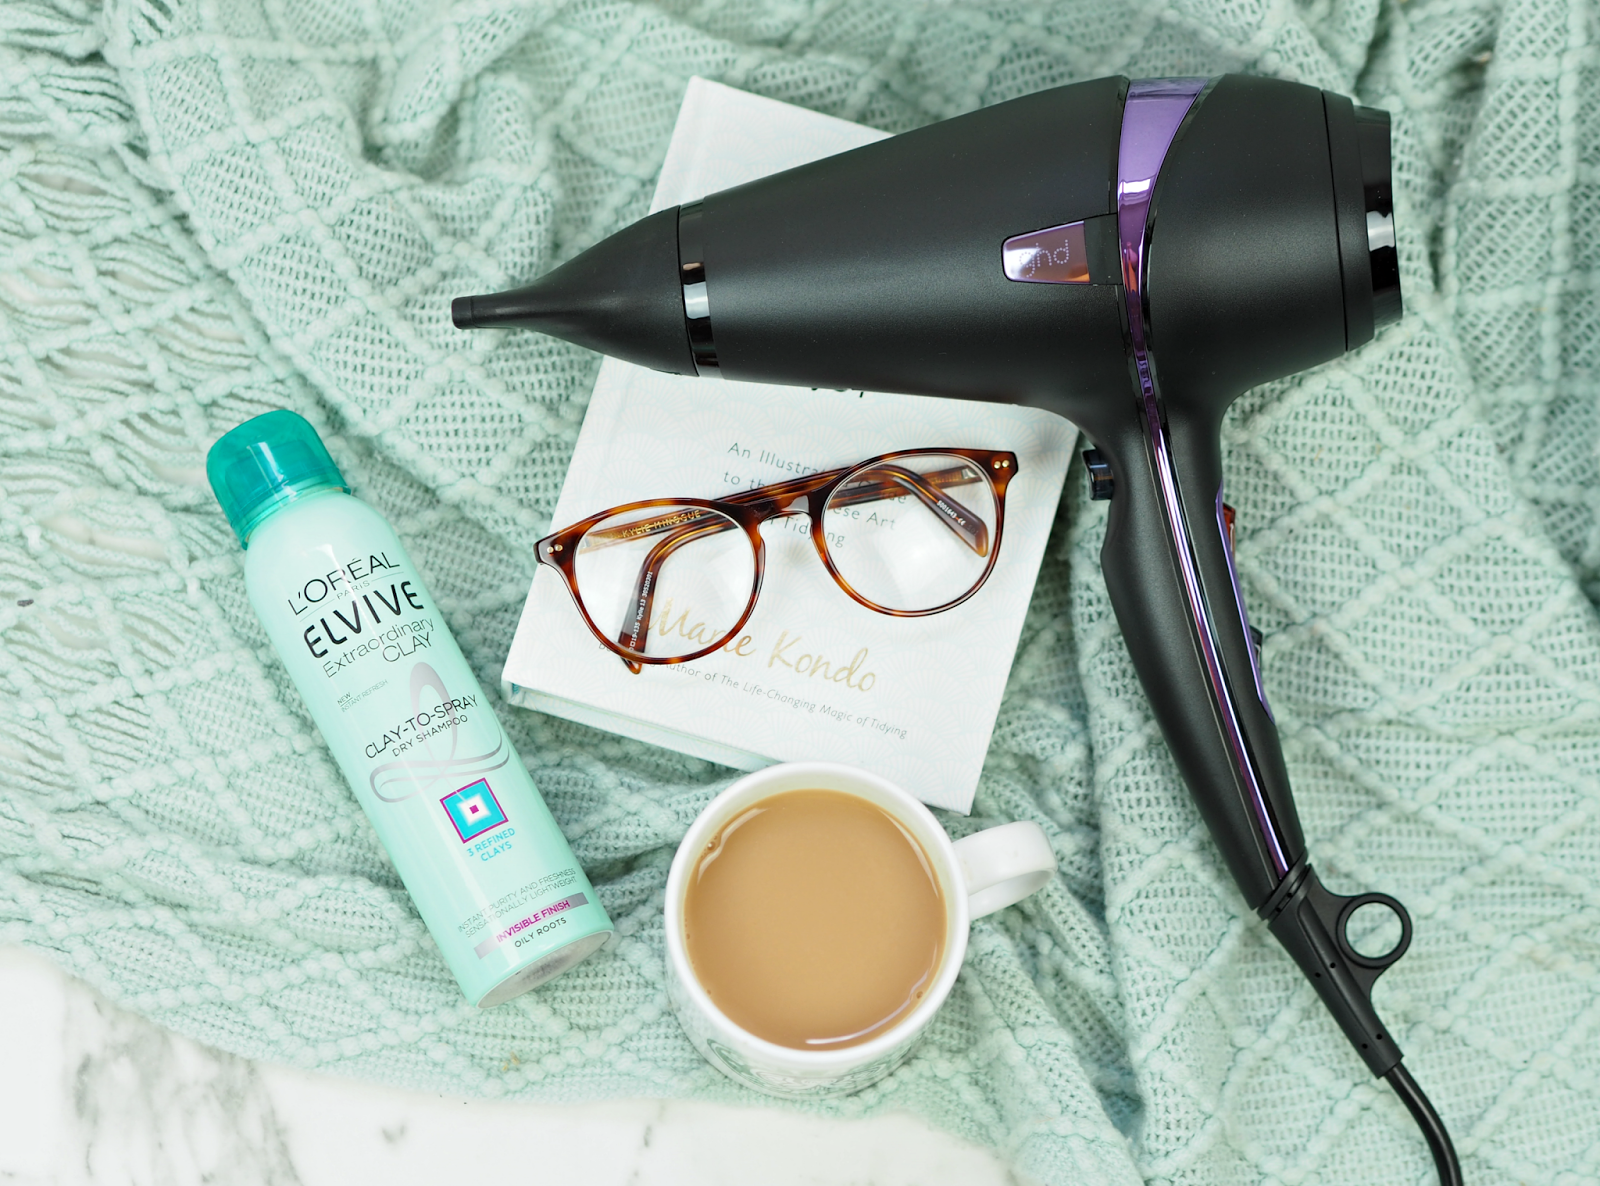 Have You Been Using Dry Shampoo All Wrong" Five Top Tips To Get The Most From It Every Time